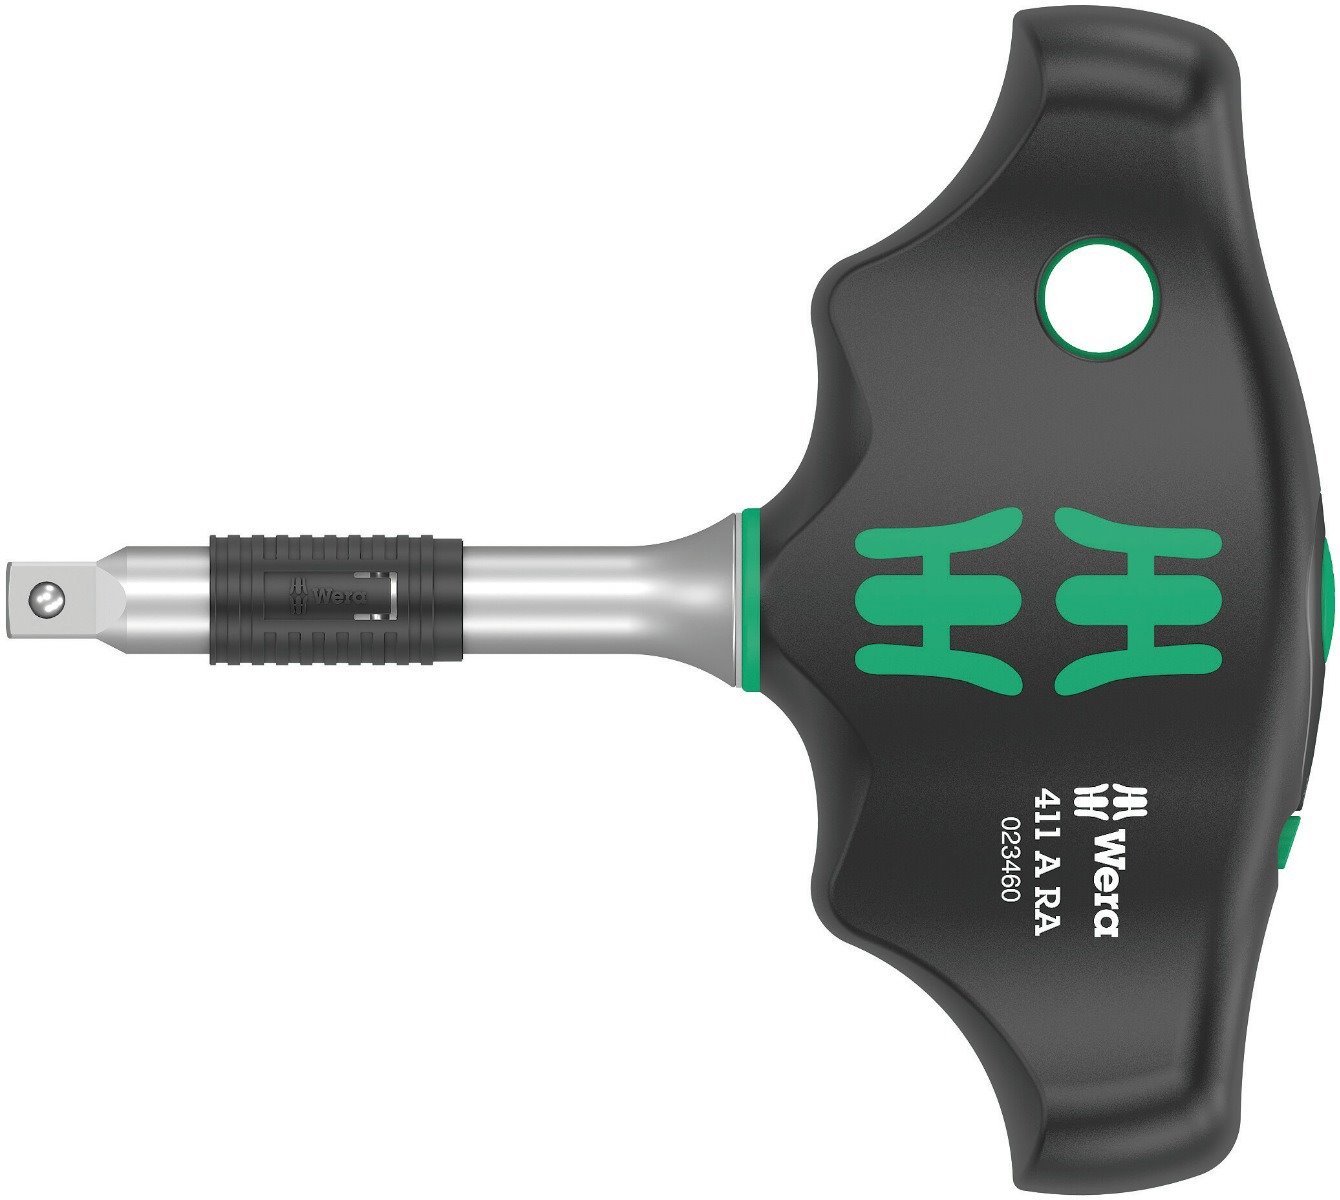 Wera 411 A Ra T-Handle Adapter Screwdriver With Ratchet Function, 1/4"